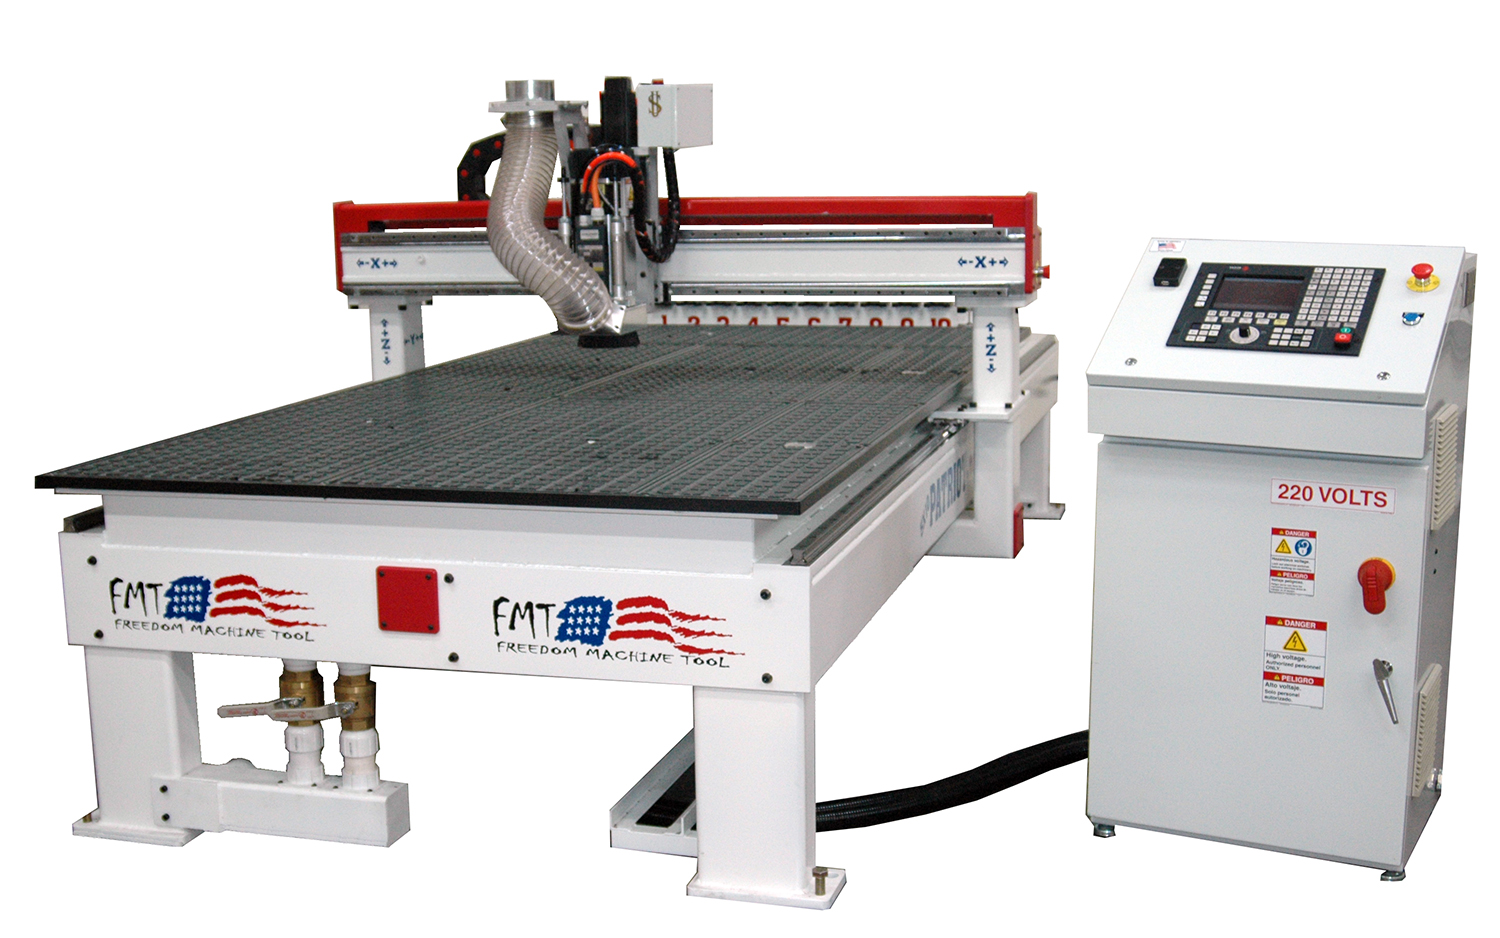 Freedom Machine Tool 3 Axis Patriot 5x10 CNC Router